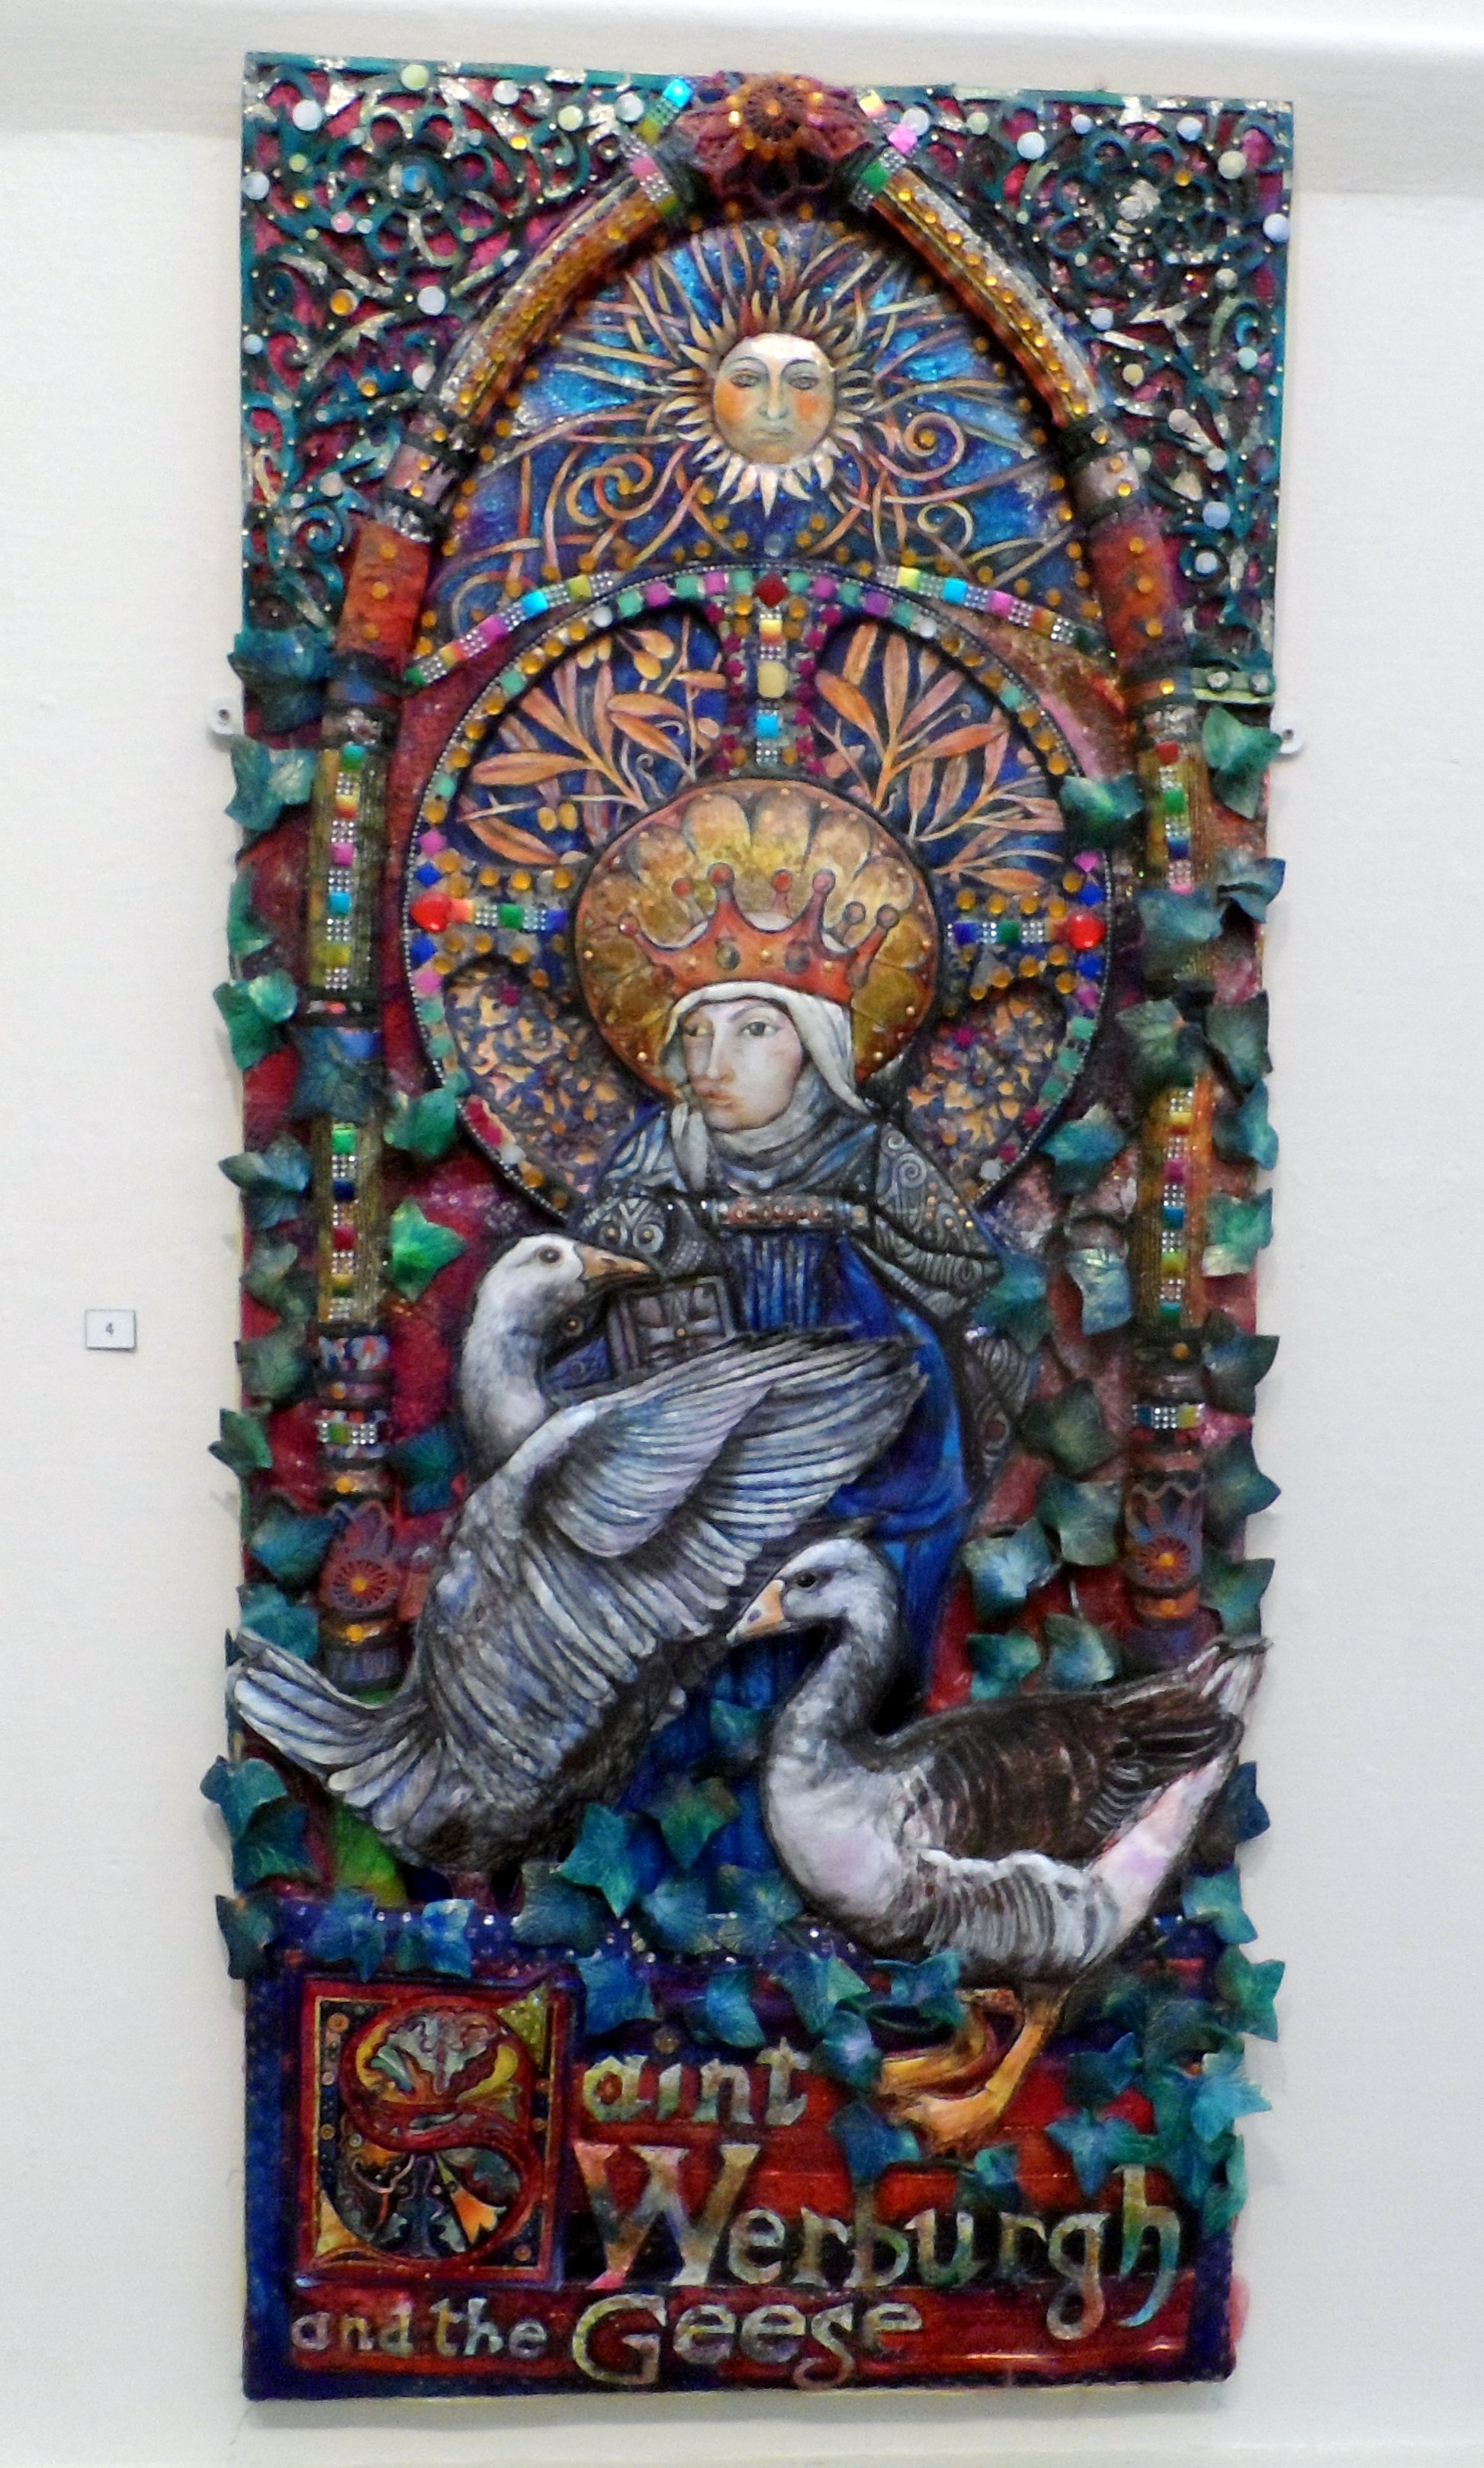 St.WERBURGH AND THE GEESE   by Nikki Parmenter, Williamson Gallery, 2019